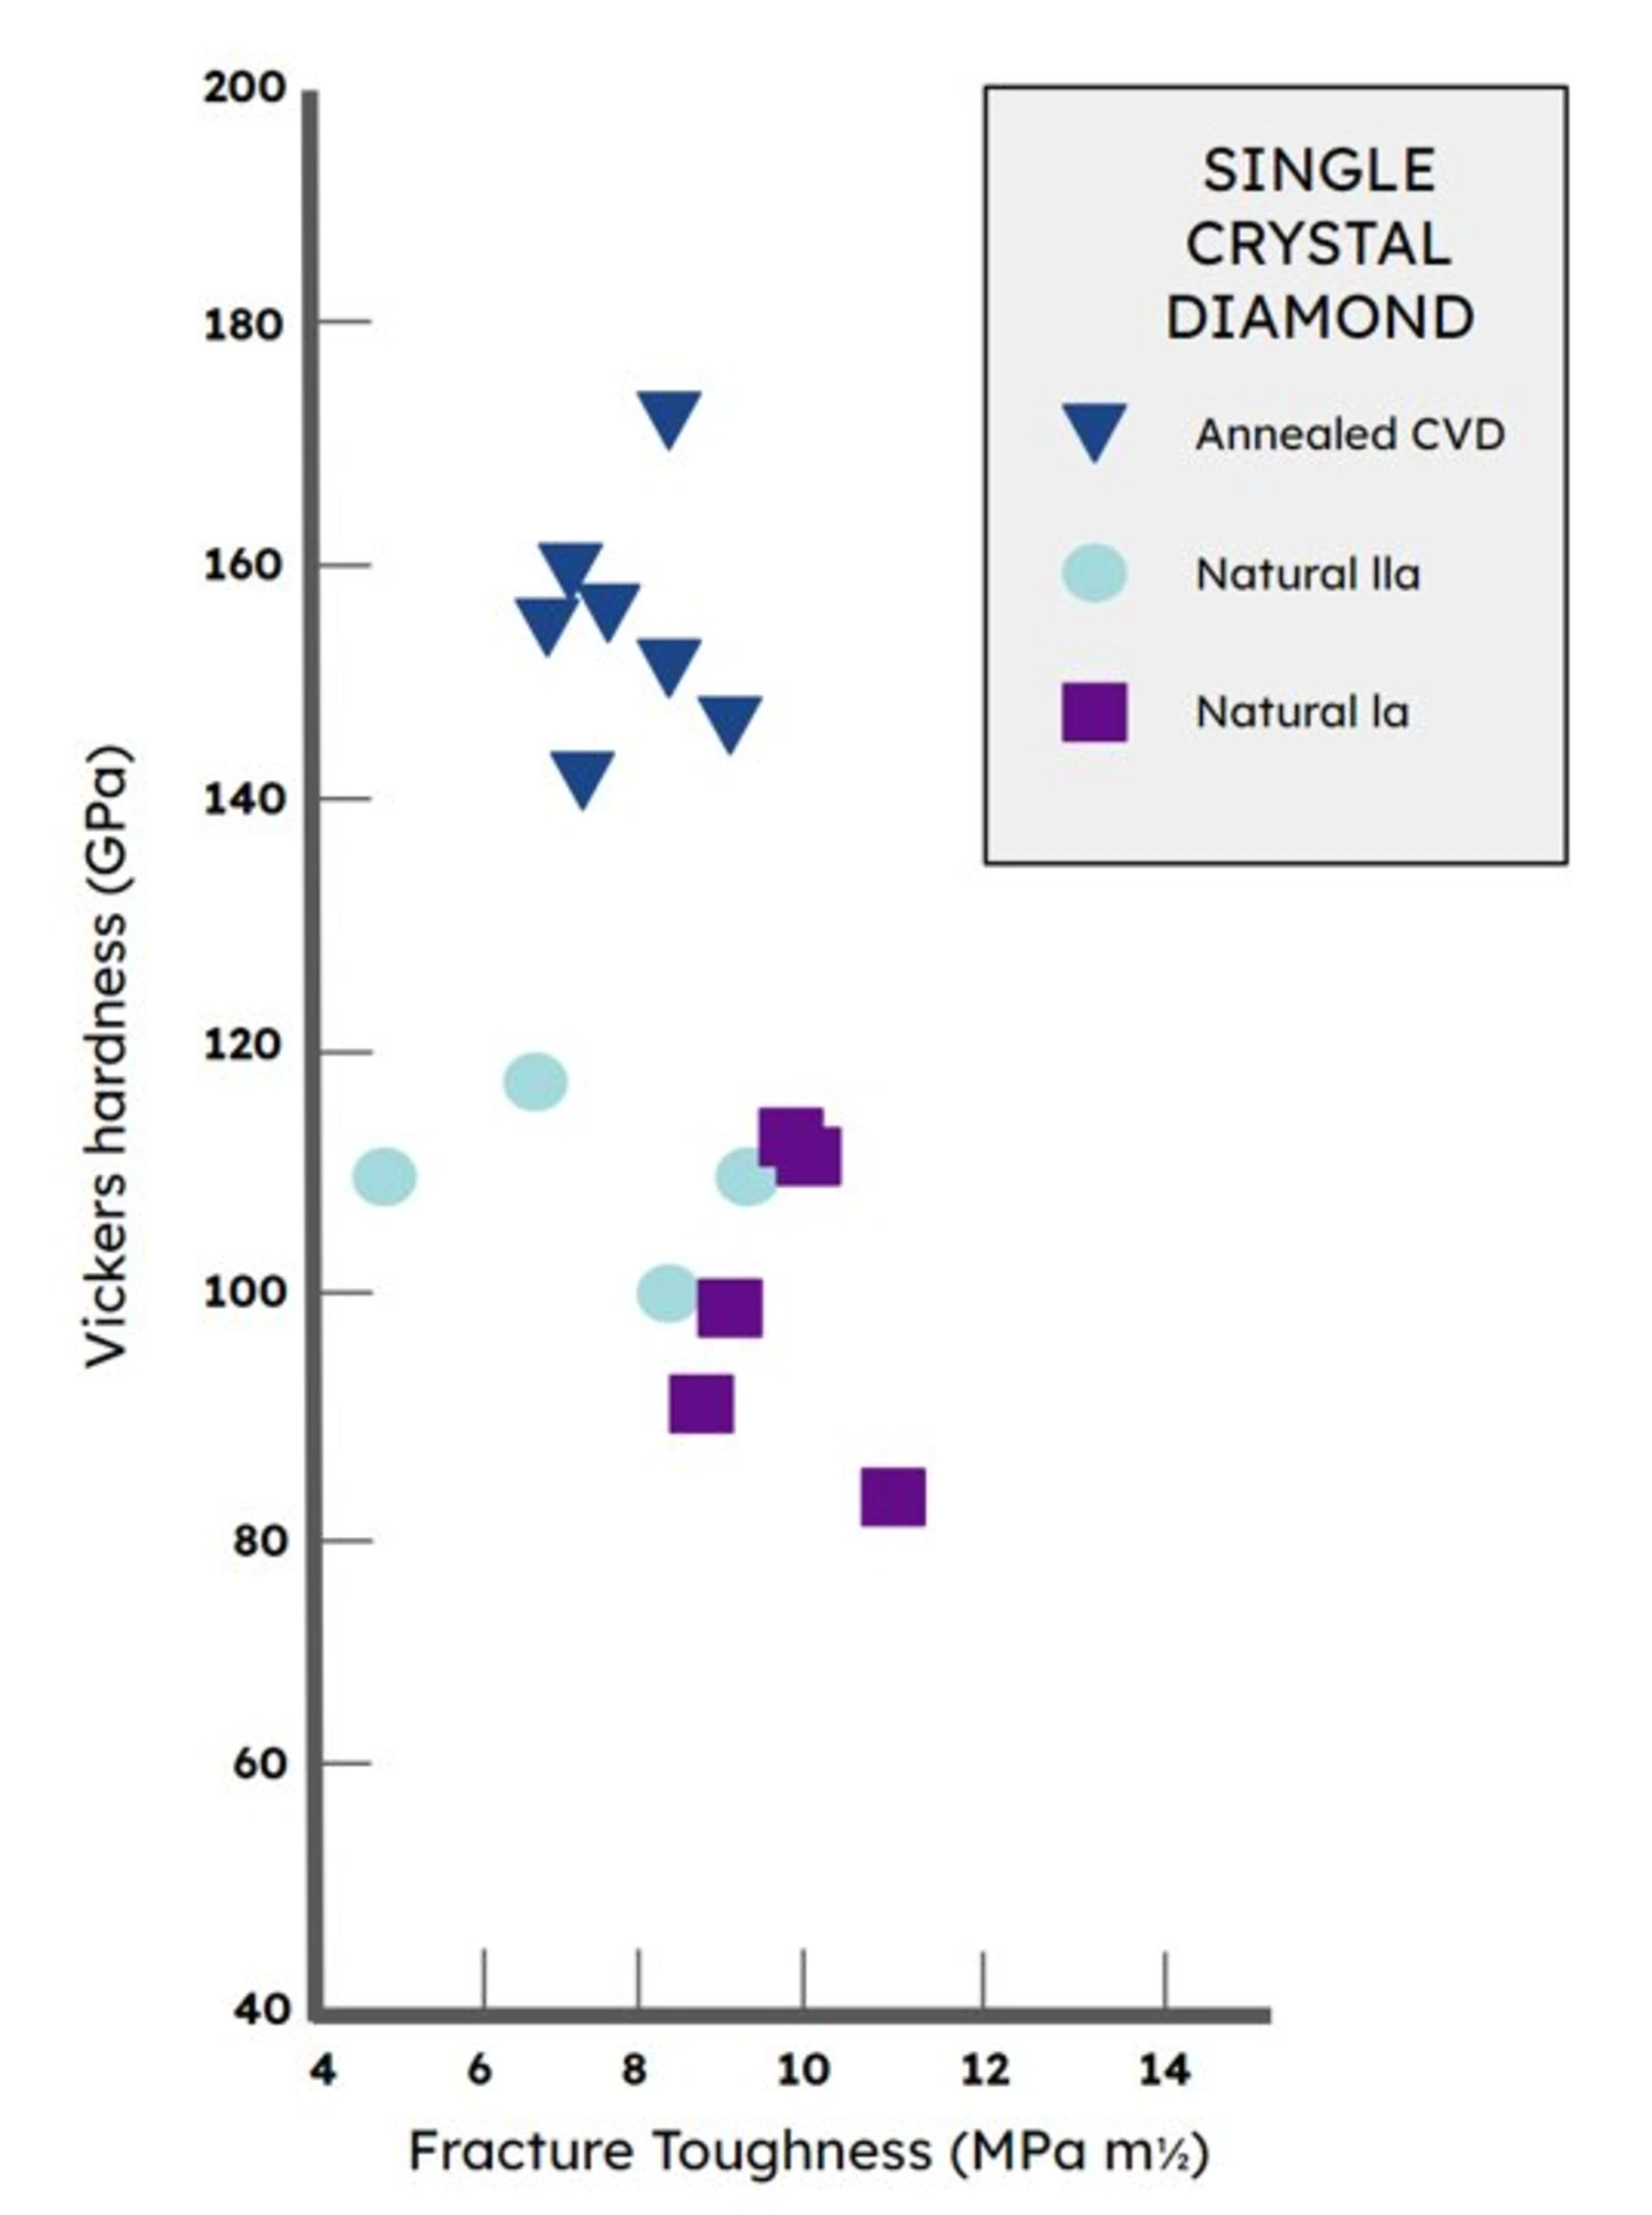 lab diamonds are harder than natural